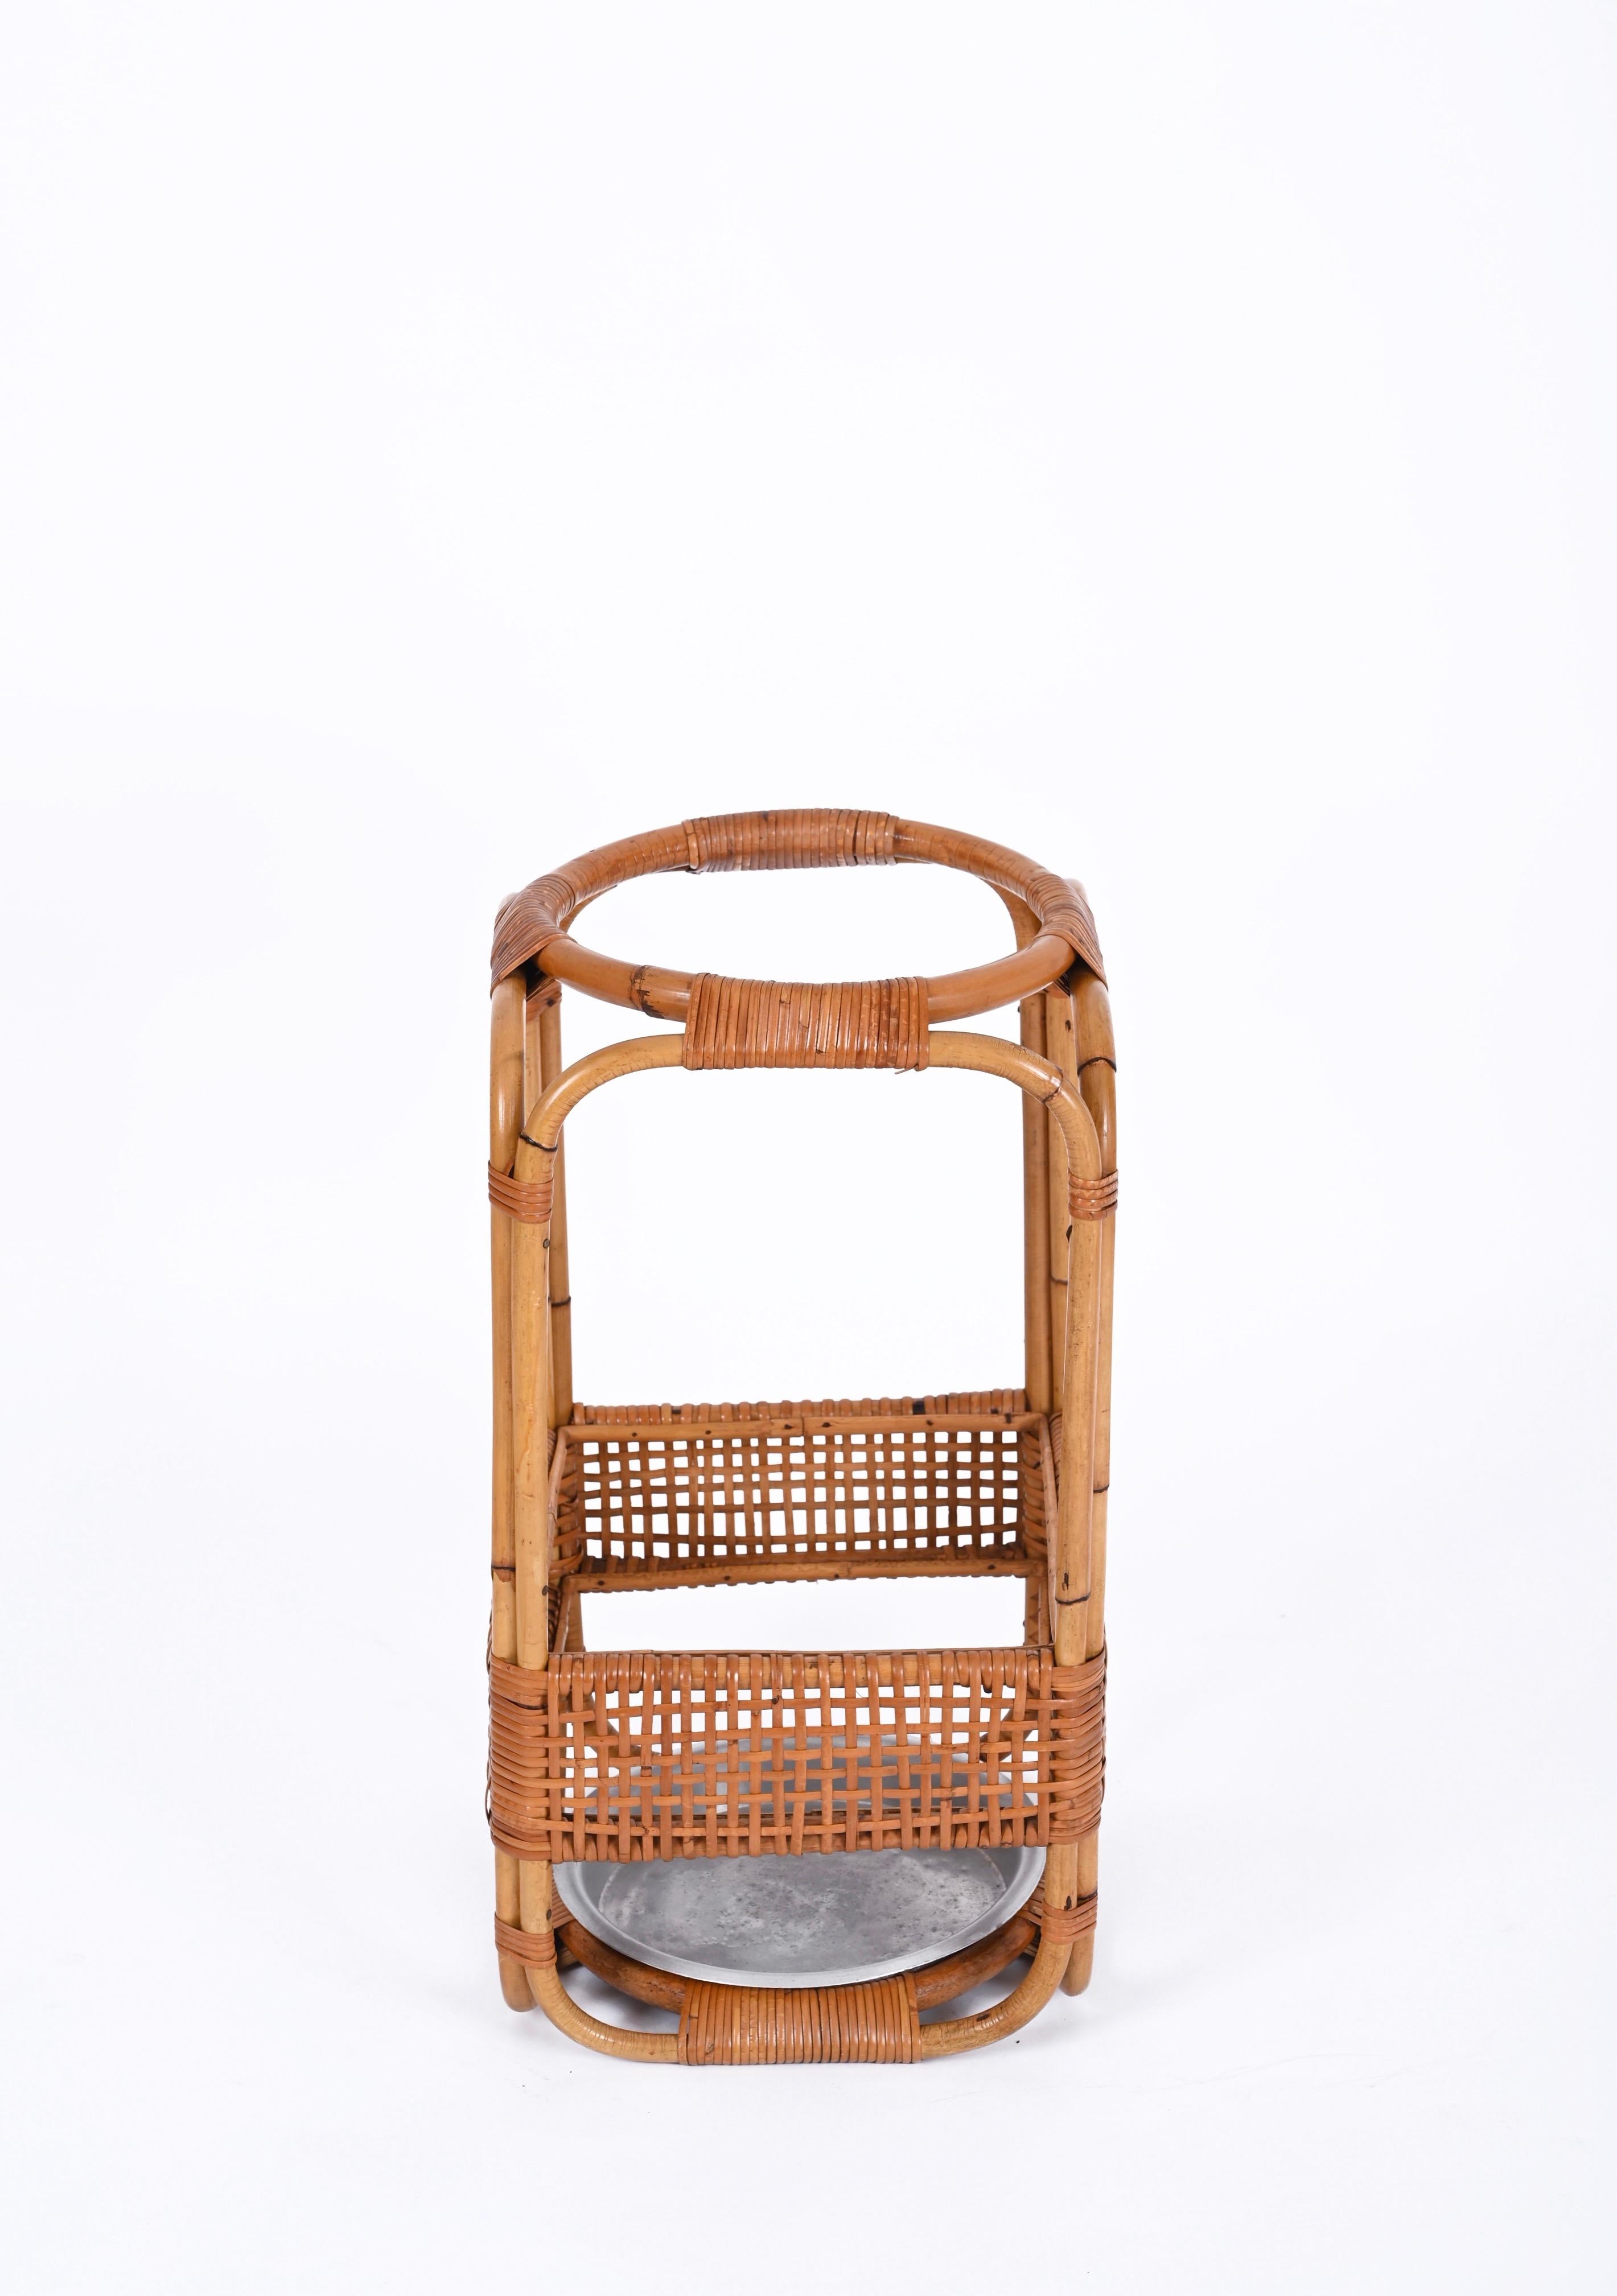 Bamboo and Wicker Umbrella Stand in the Style of Franco Albini, Italy, 1960s For Sale 5